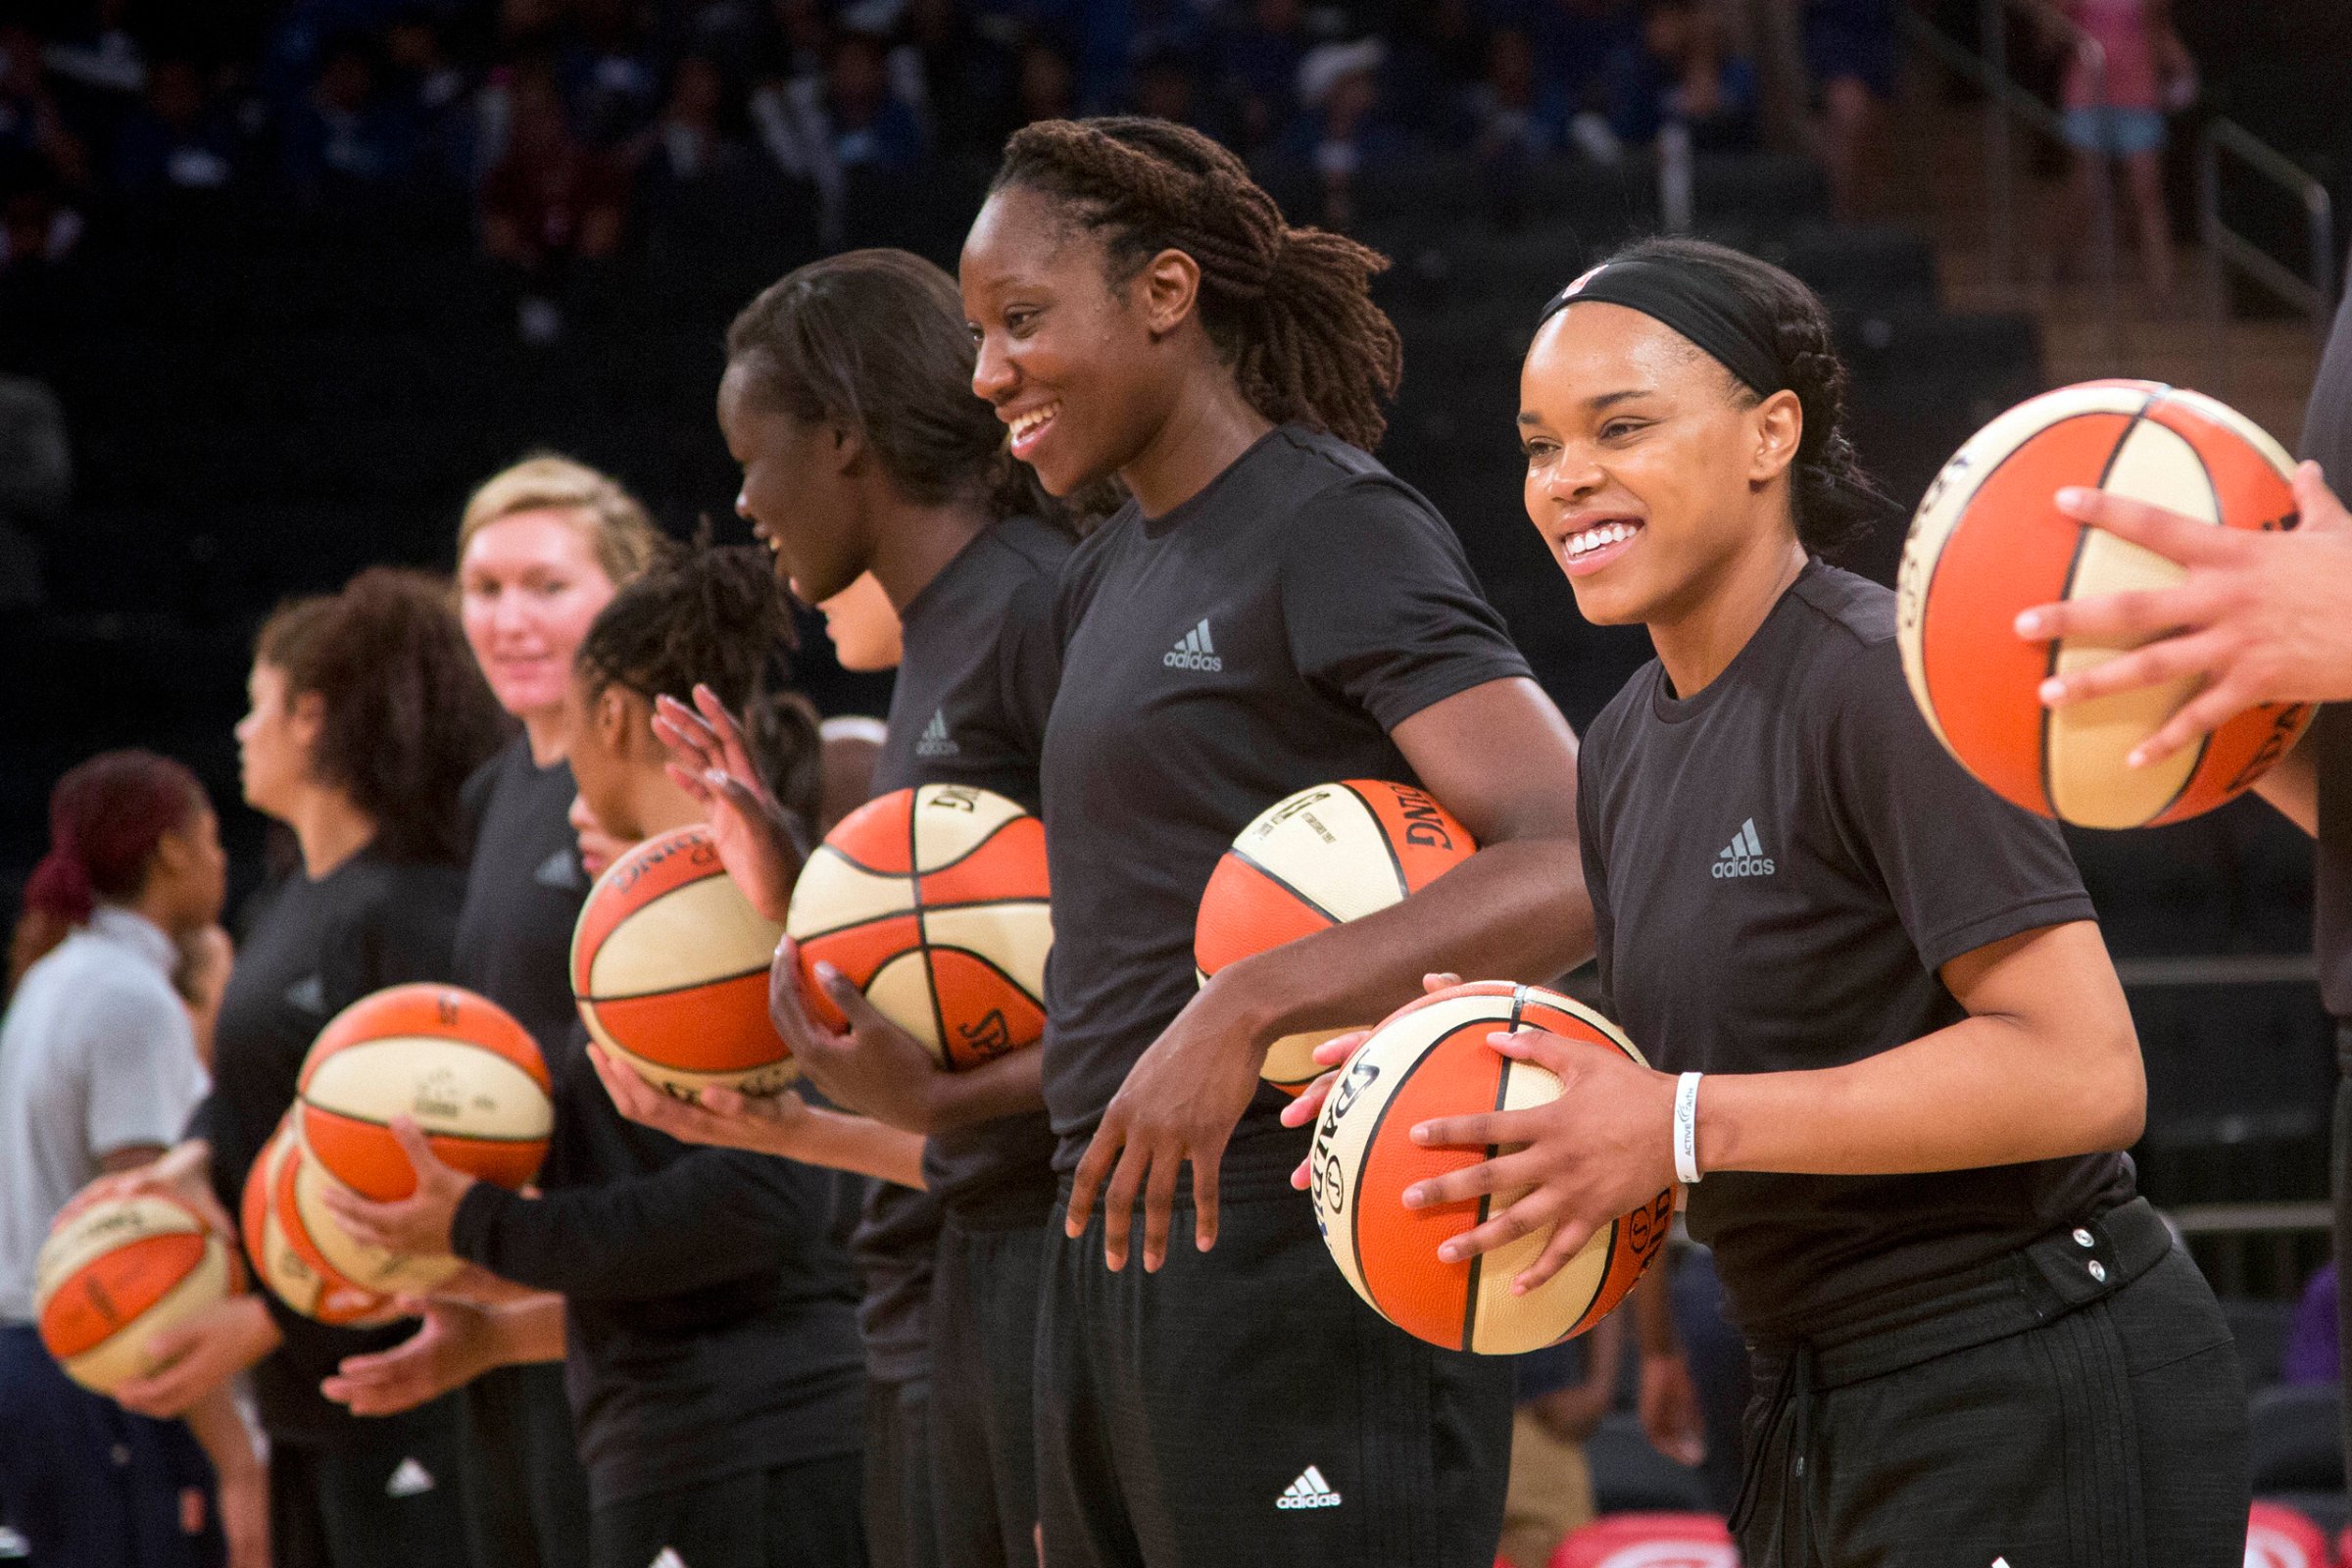 Members of the New York Liberty basketball team await the start of a game against the Atlanta Dream in New York City on July 13, 2016.